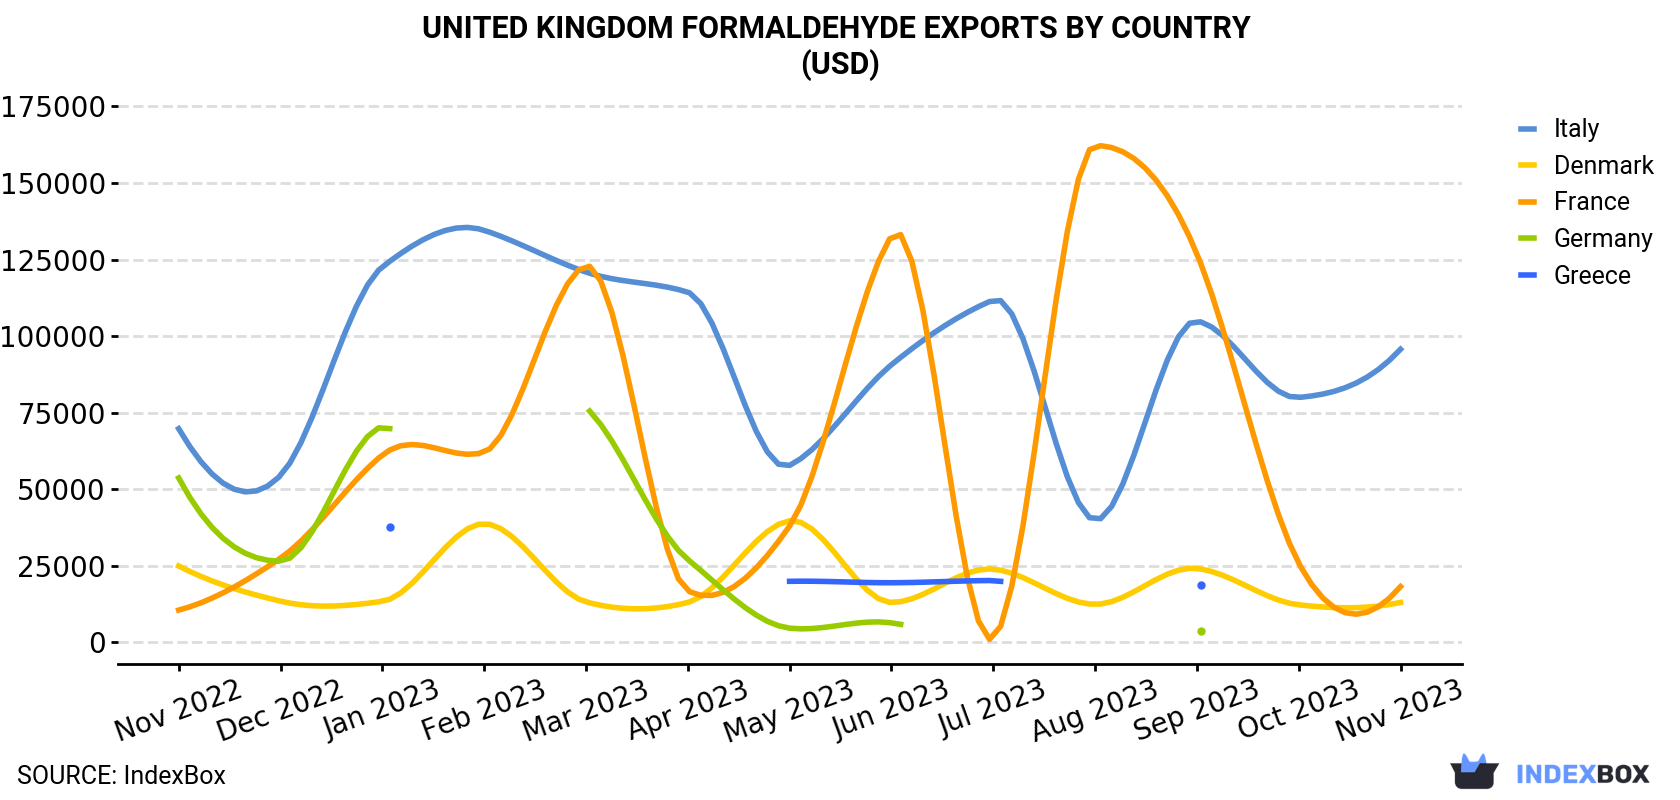 United Kingdom Formaldehyde Exports By Country (USD)